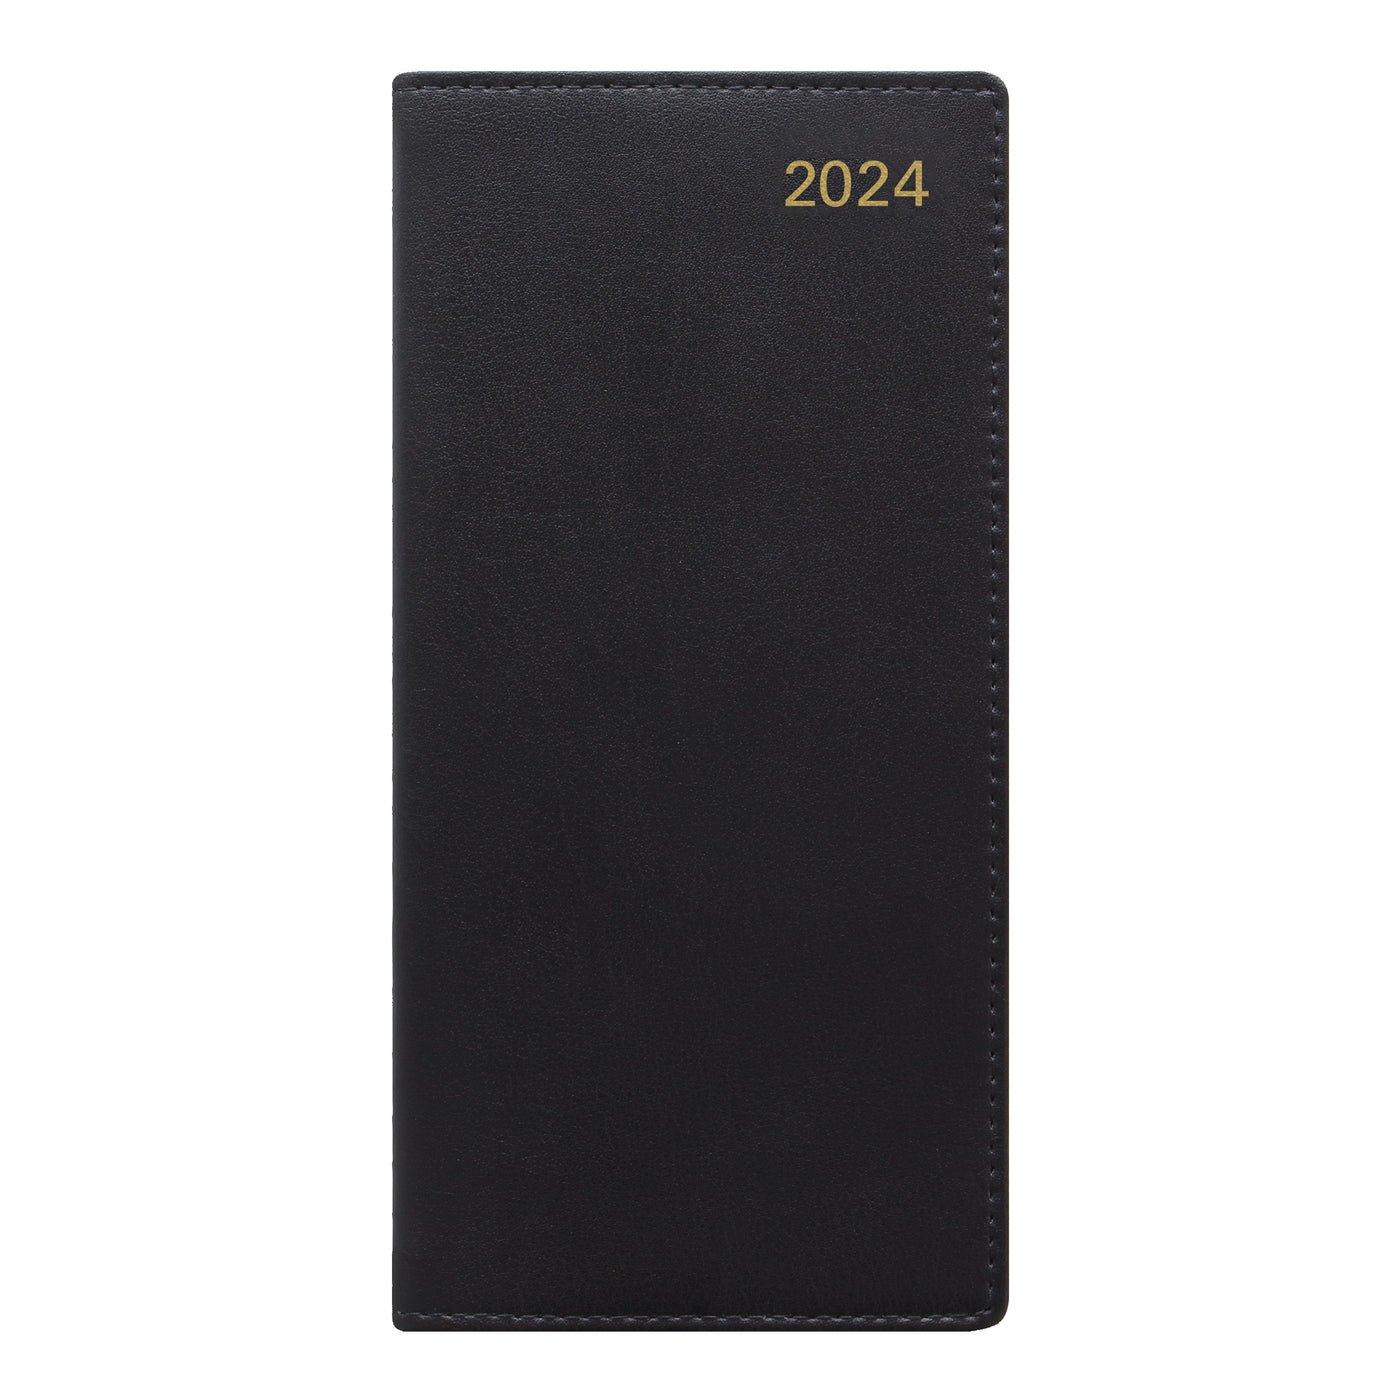 Letts Belgravia Slim Landscape Week to View Leather Diary with Appointments - 6 3/4" x 3 1/4" -Black